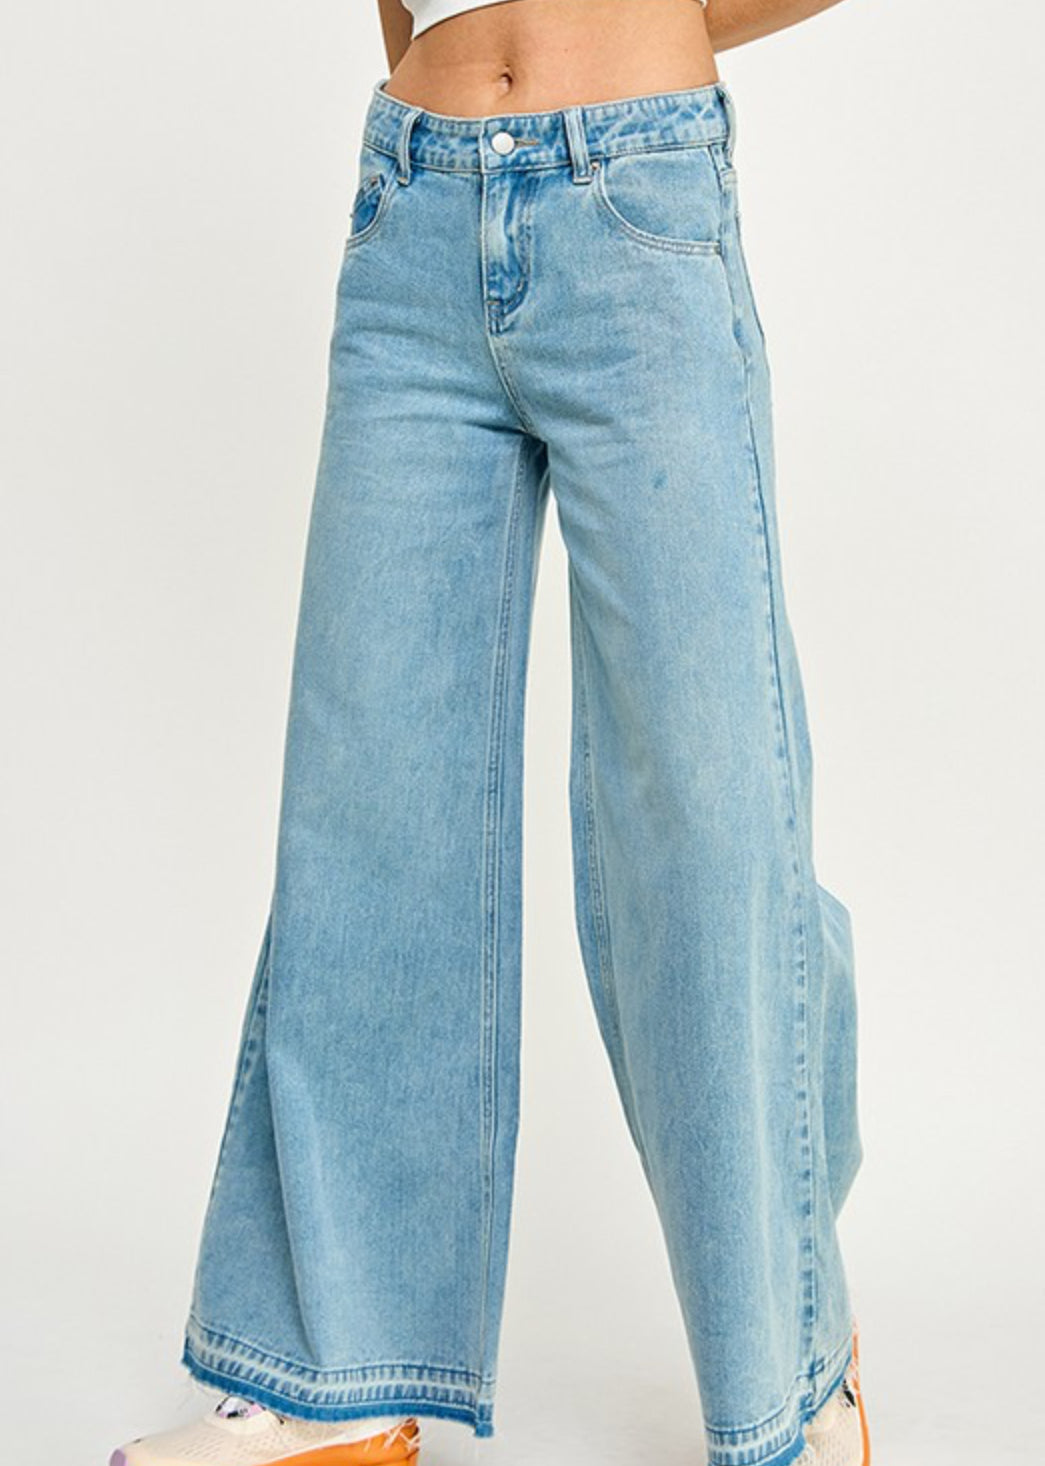 Willy wide lag jeans